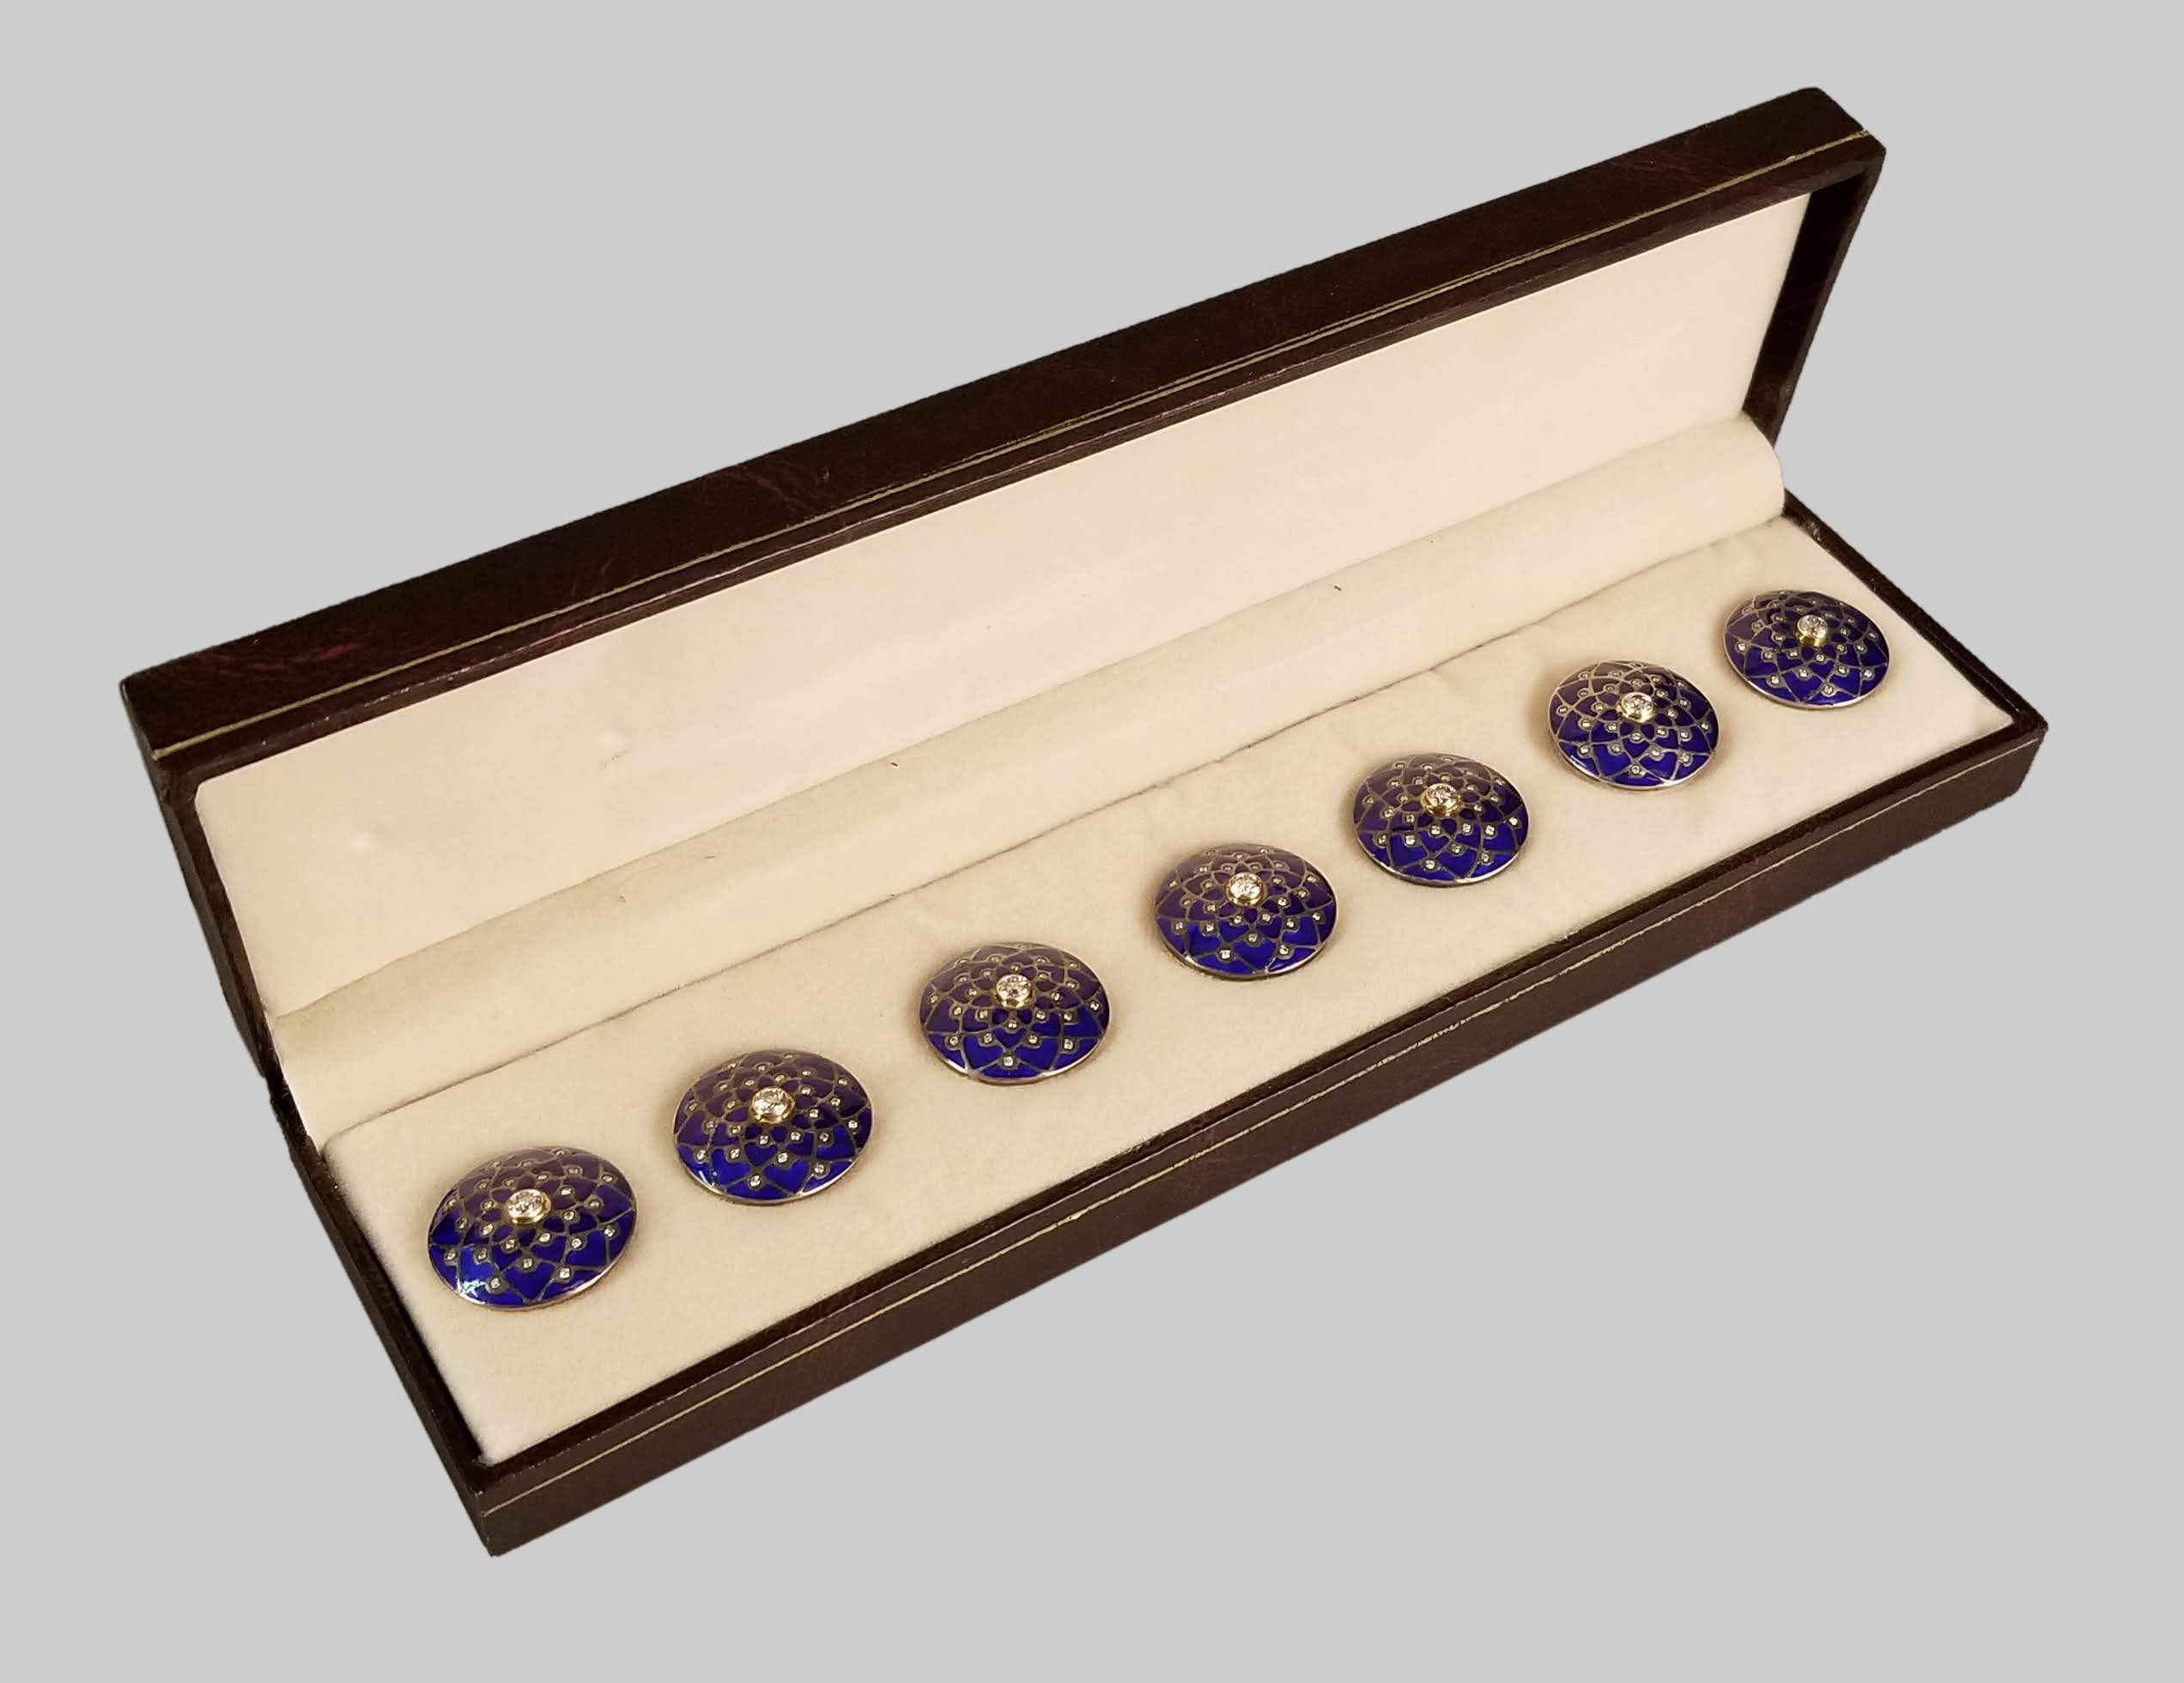 Fig. 7a - Unknown maker, Buttons with flower heads, 1880-1920, sterling silver, gold, diamonds, enamel, TRRF Collection.